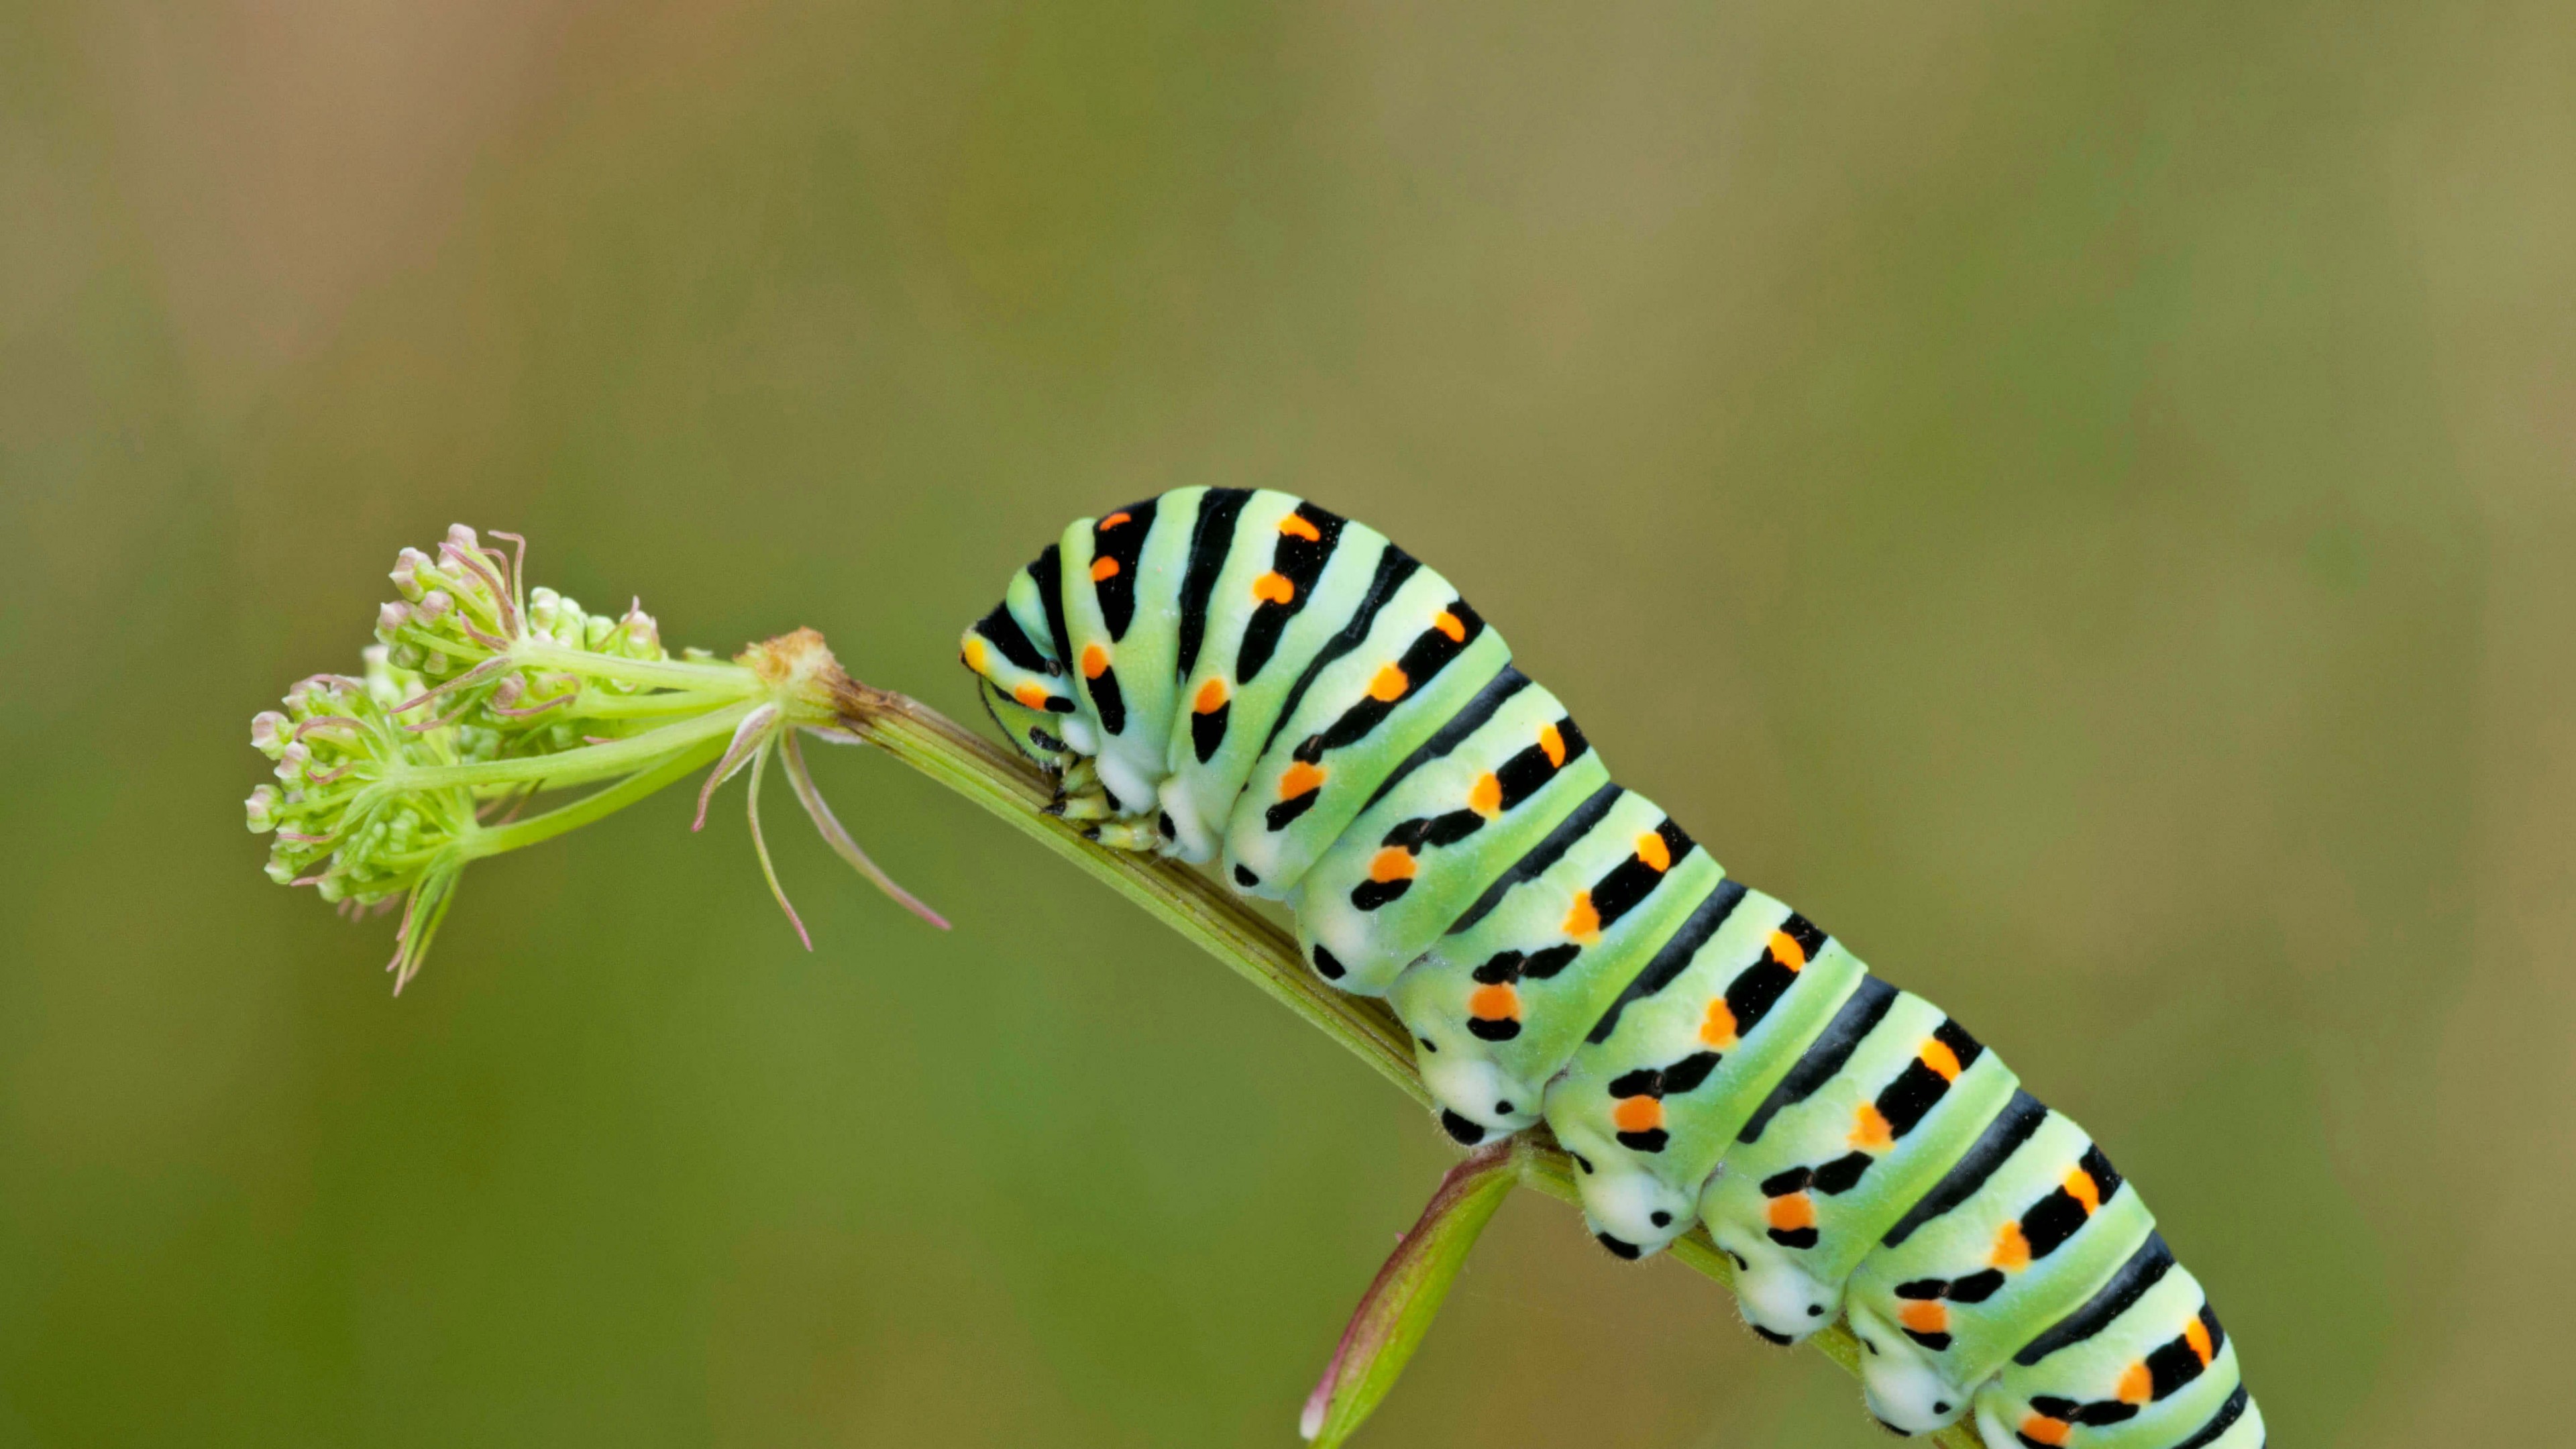 Caterpillars Green Leaves Insect Simple Background Minimalism Closeup Nature 3840x2160